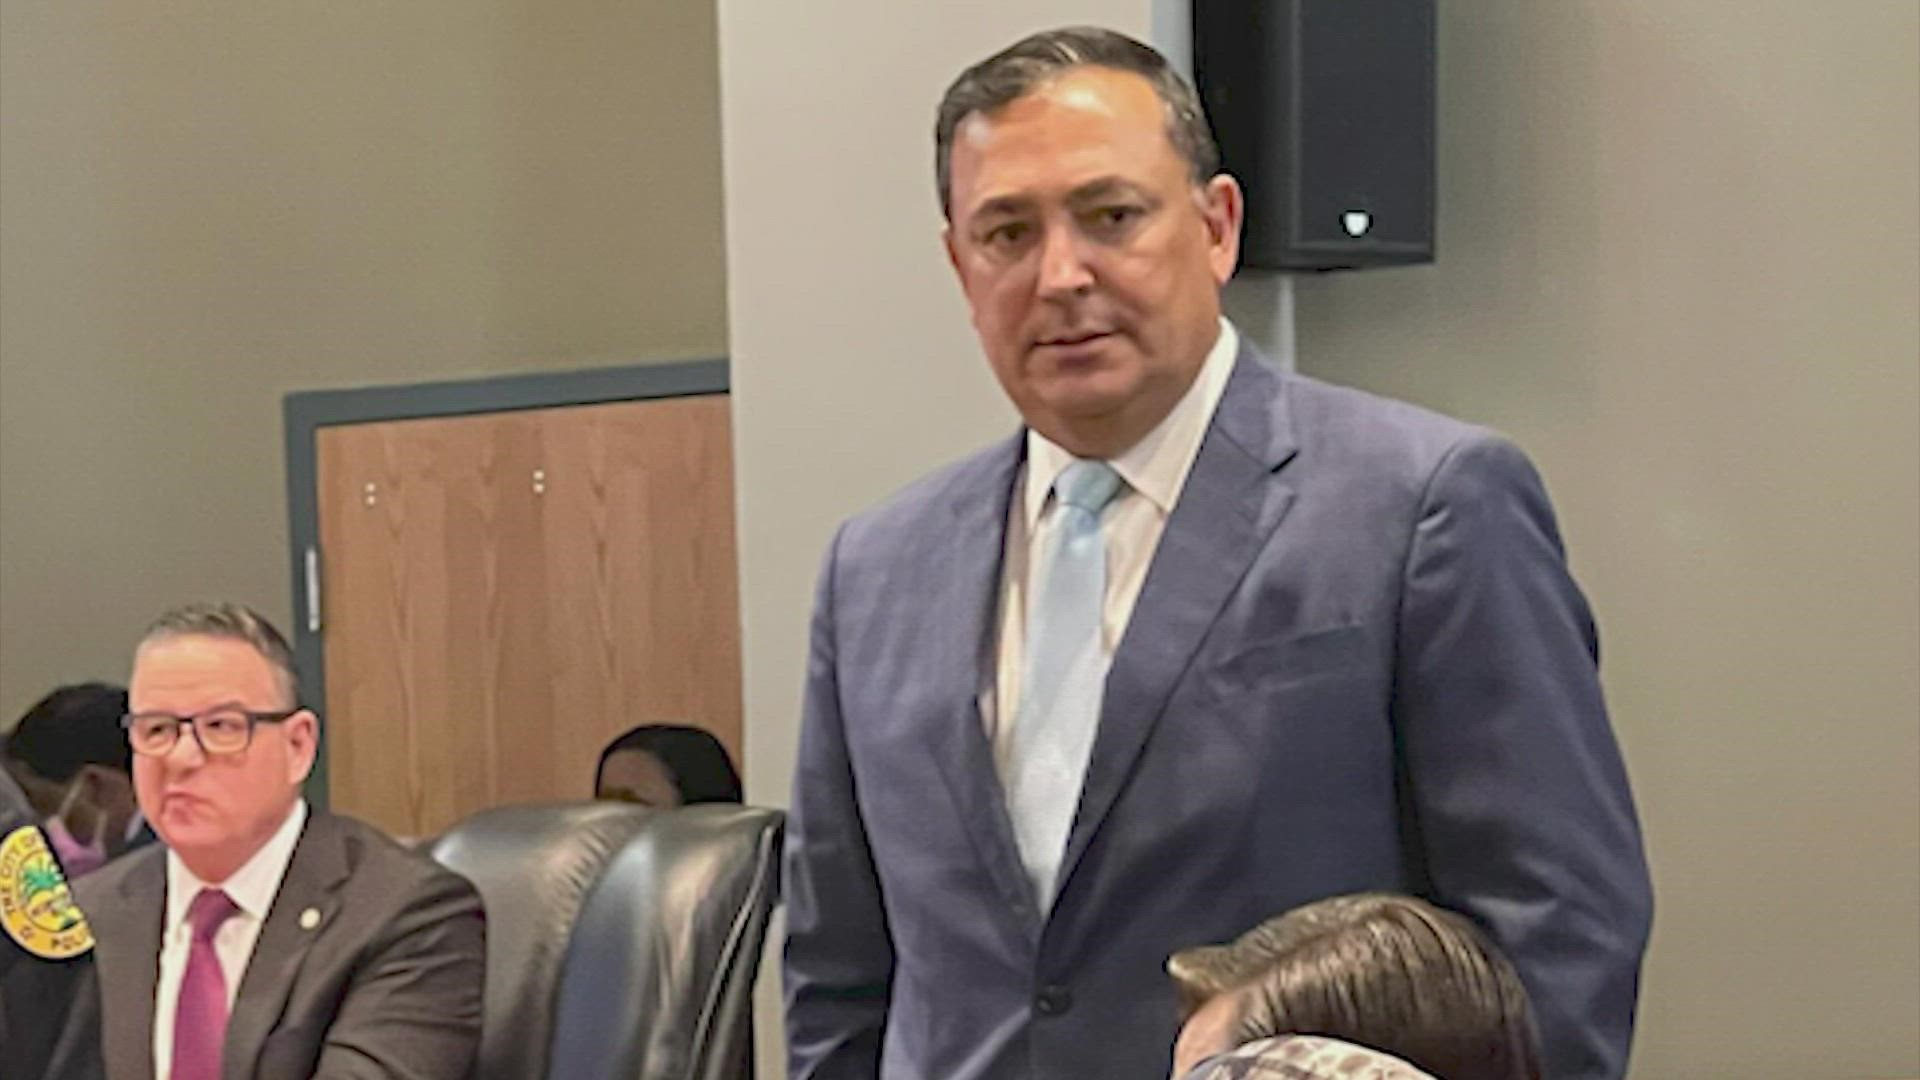 Former HPD Chief Art Acevedo is now out of a job after the Miami commissioners unanimously vote to fire him as police chief.